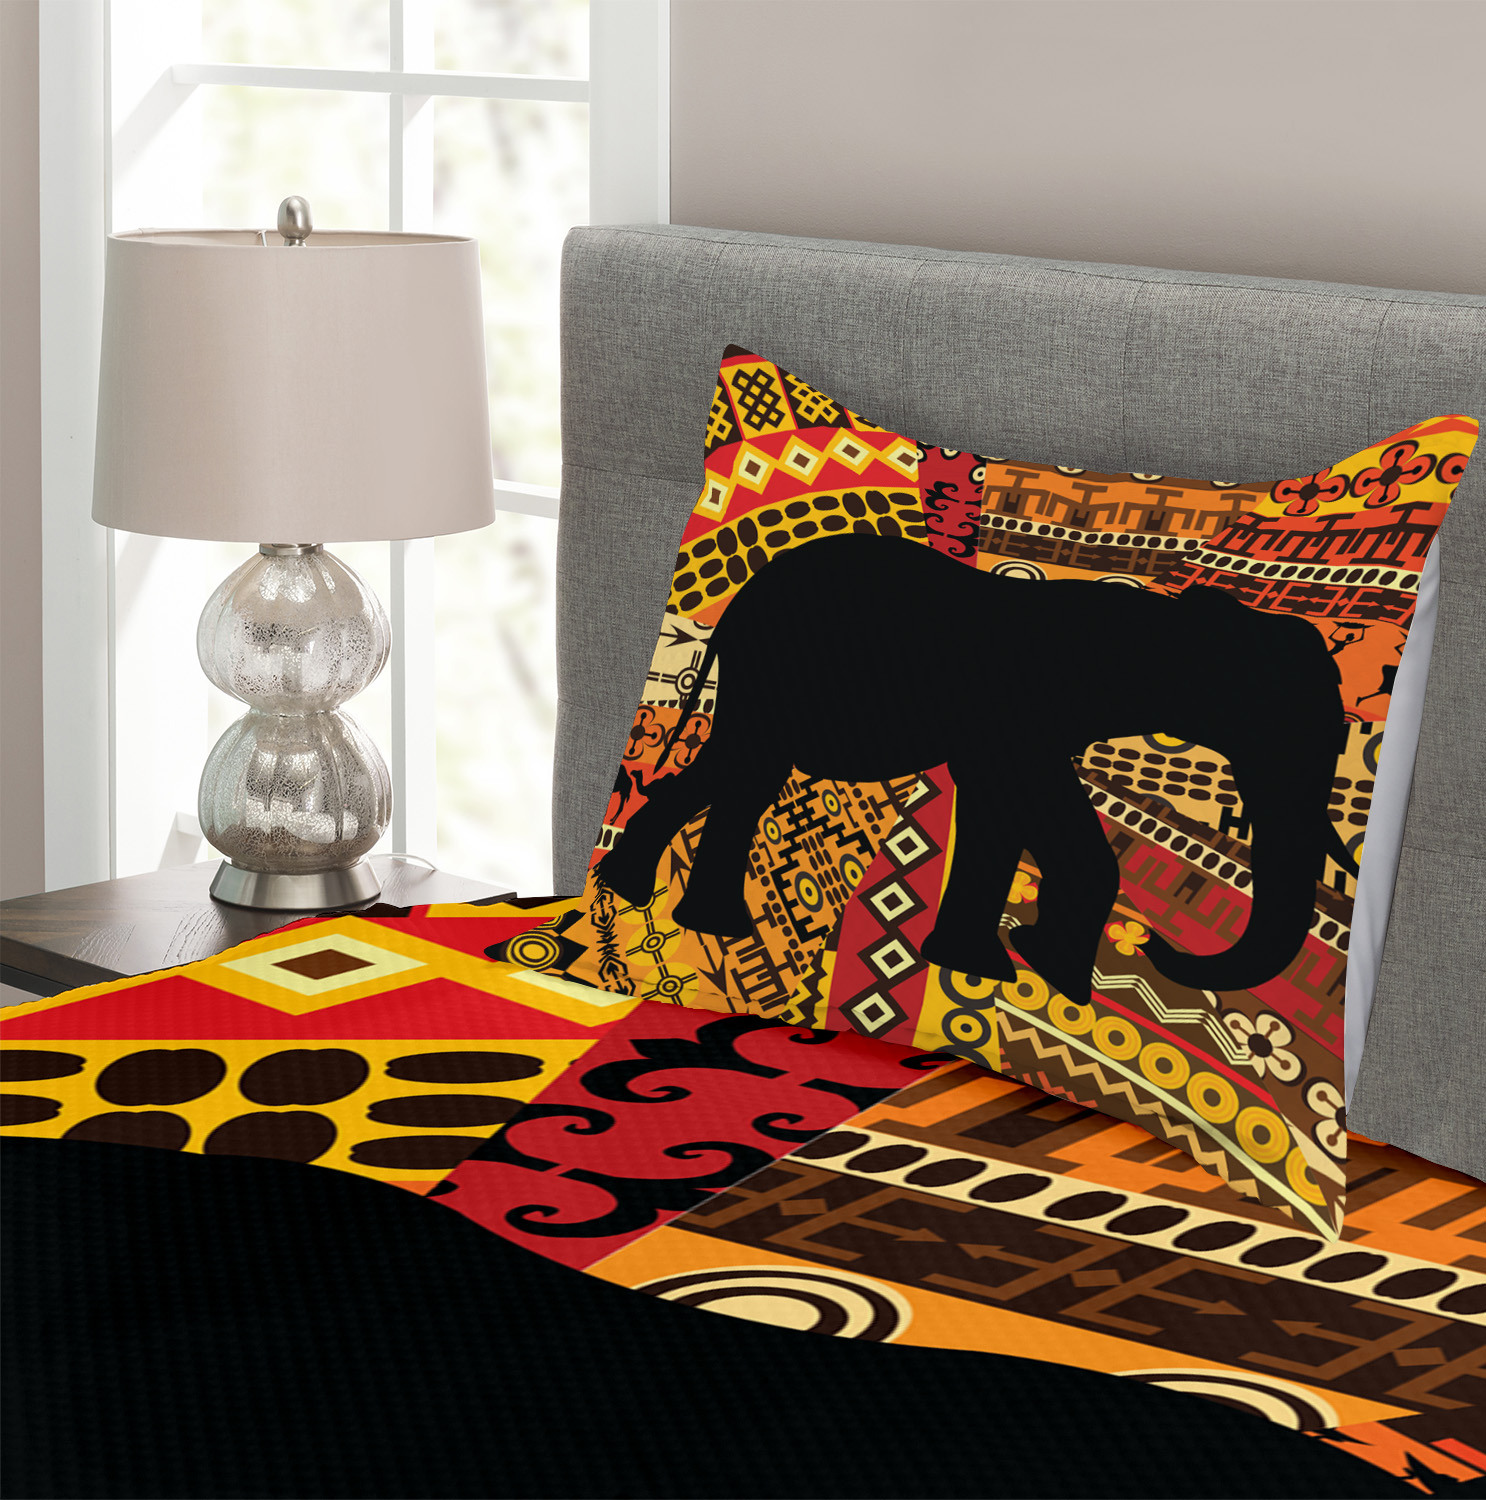 Walking Down a Road Print Elephant Quilted Bedspread & Pillow Shams Set 